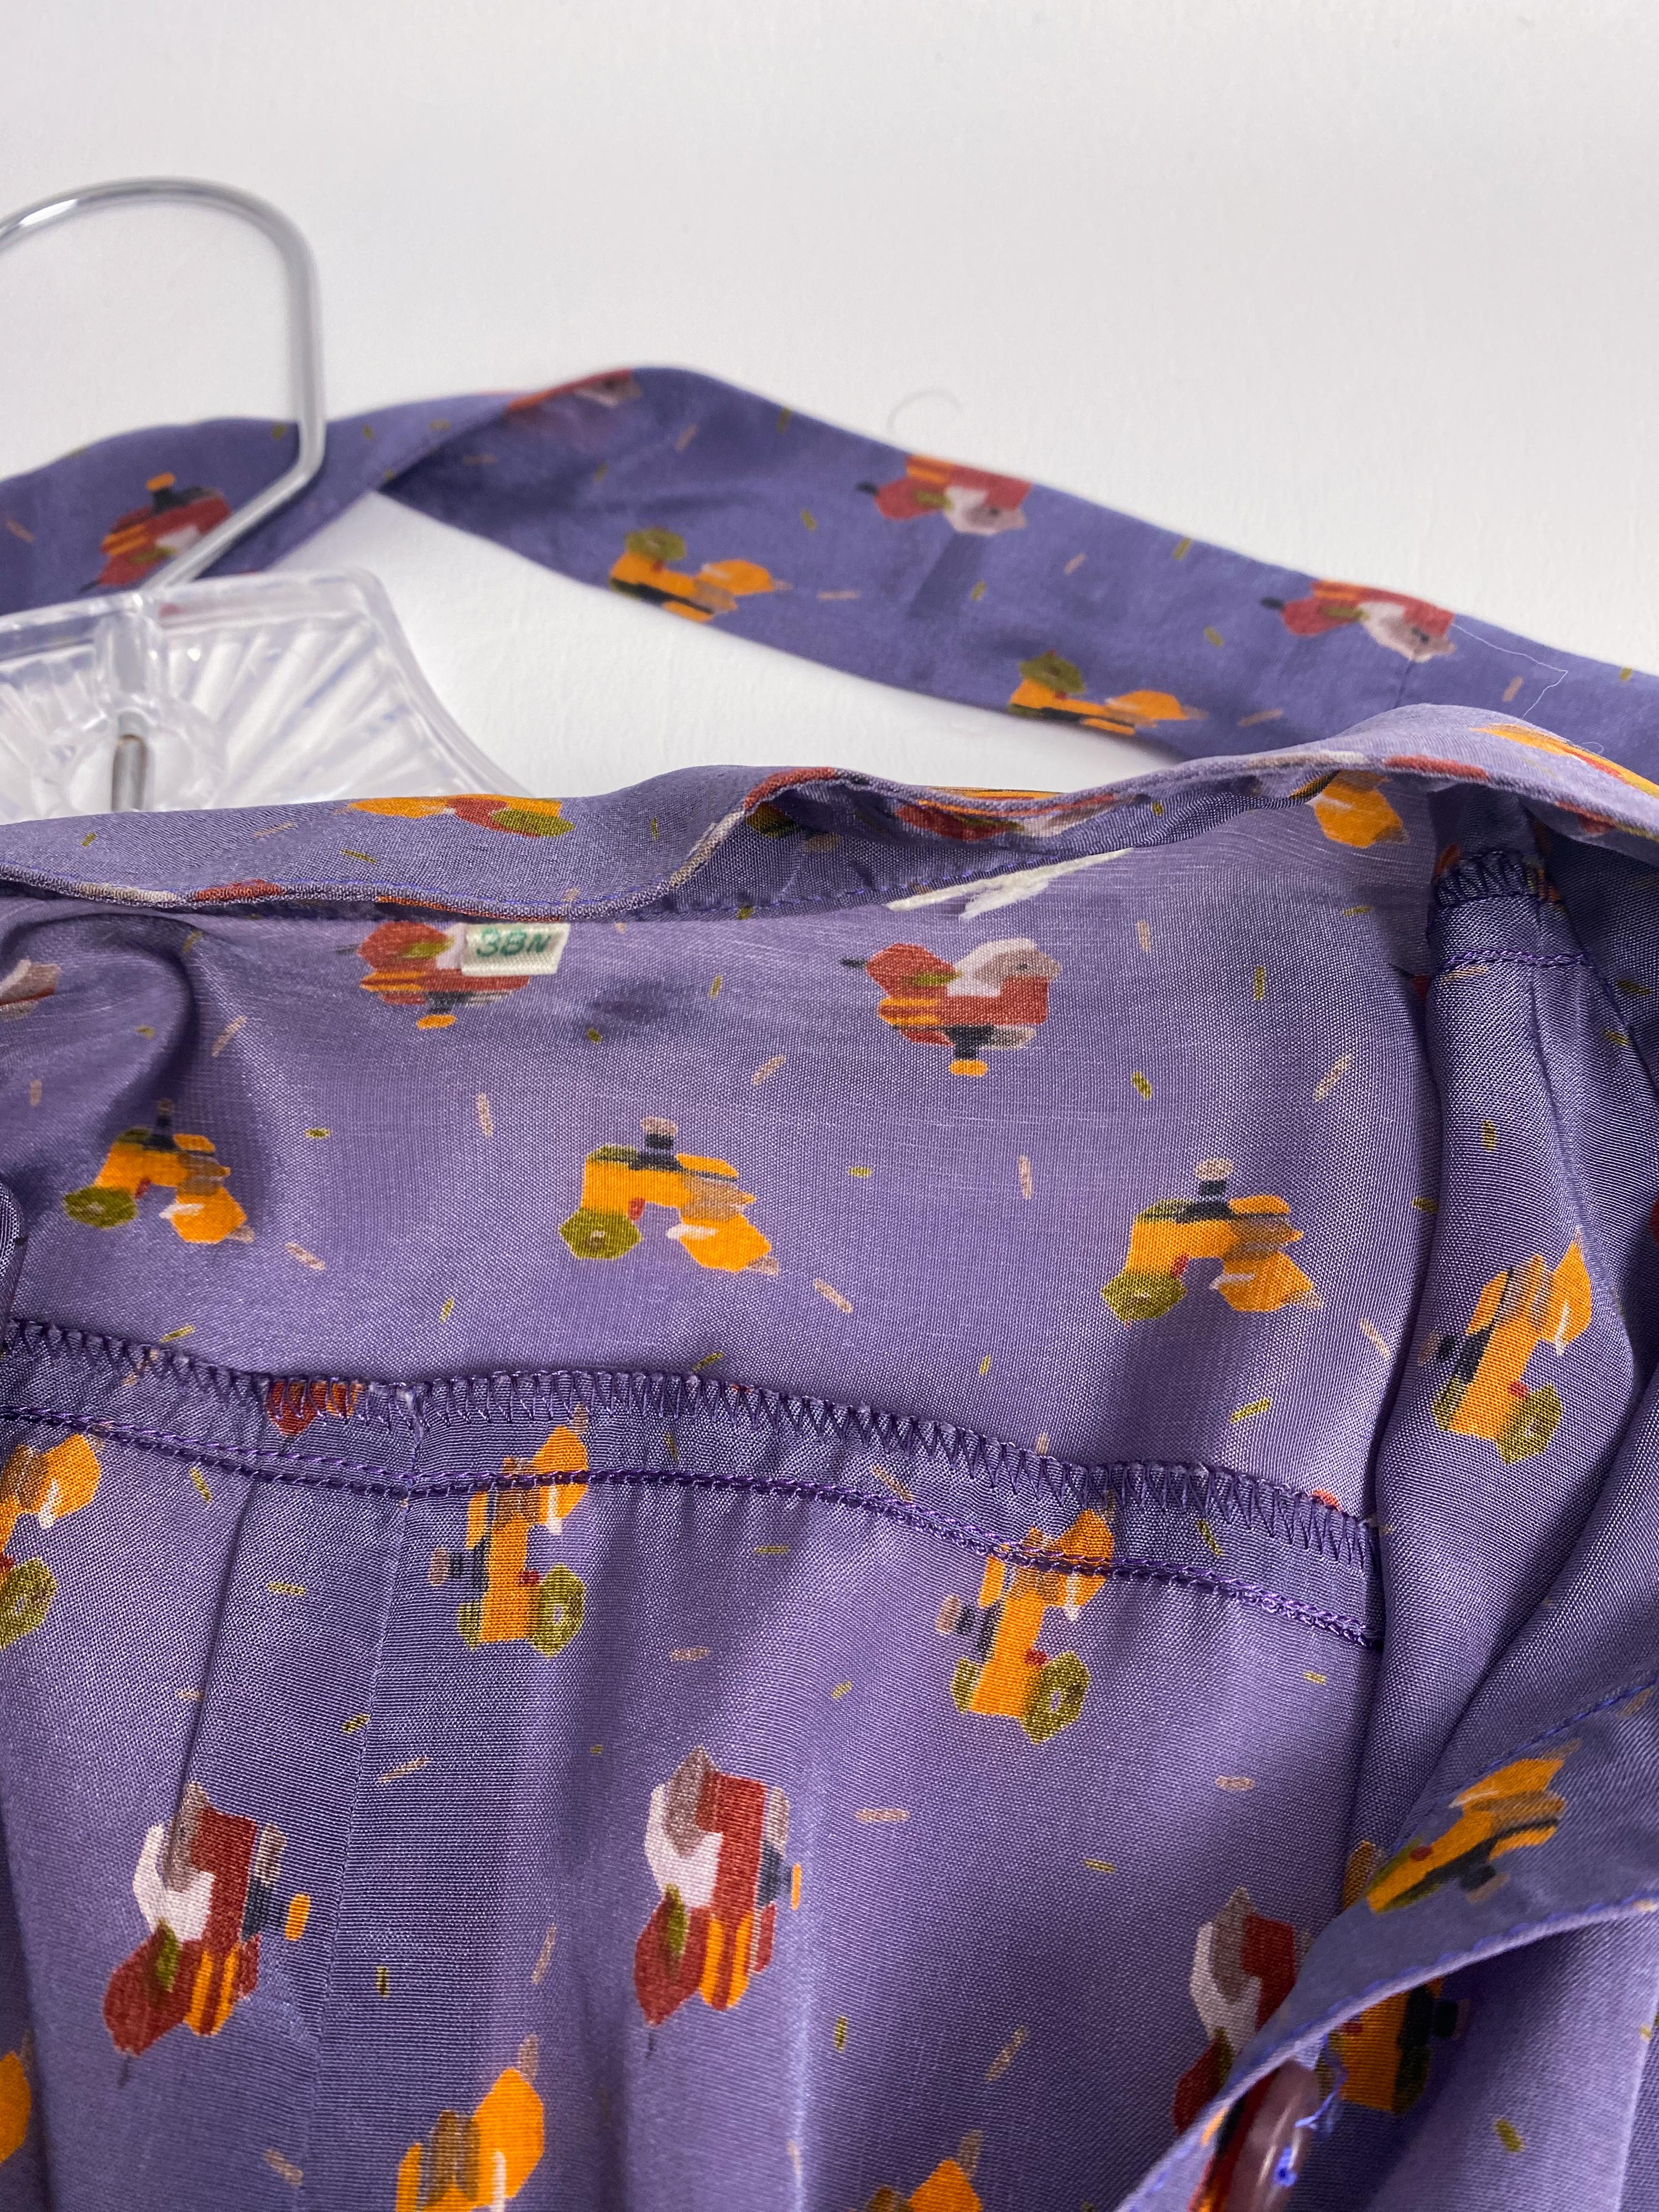 Vintage 1980s Silky Polyester Blouse Top Purple with Print Decor Size 6 For Sale 7